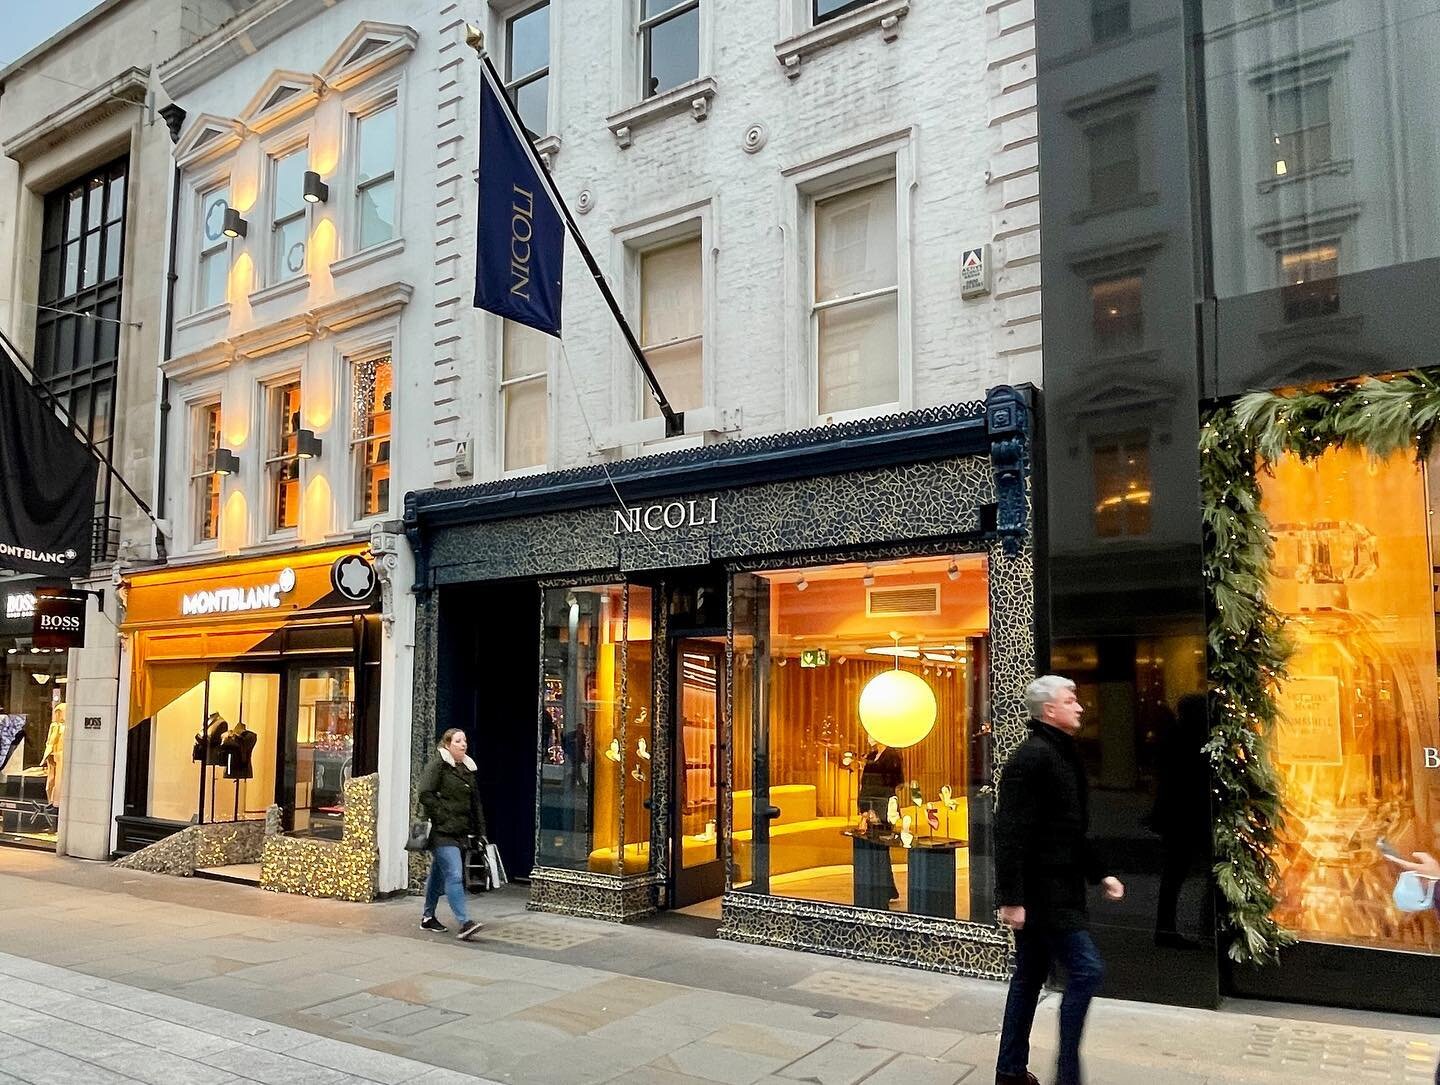 #Day21 of the Kenningham Retail #adventcalendar. More often than not deals do not happen quickly and persistence is the key on both sides of the transaction. This was very much in evidence here in the letting to @nicoliofficial on New Bond Street for